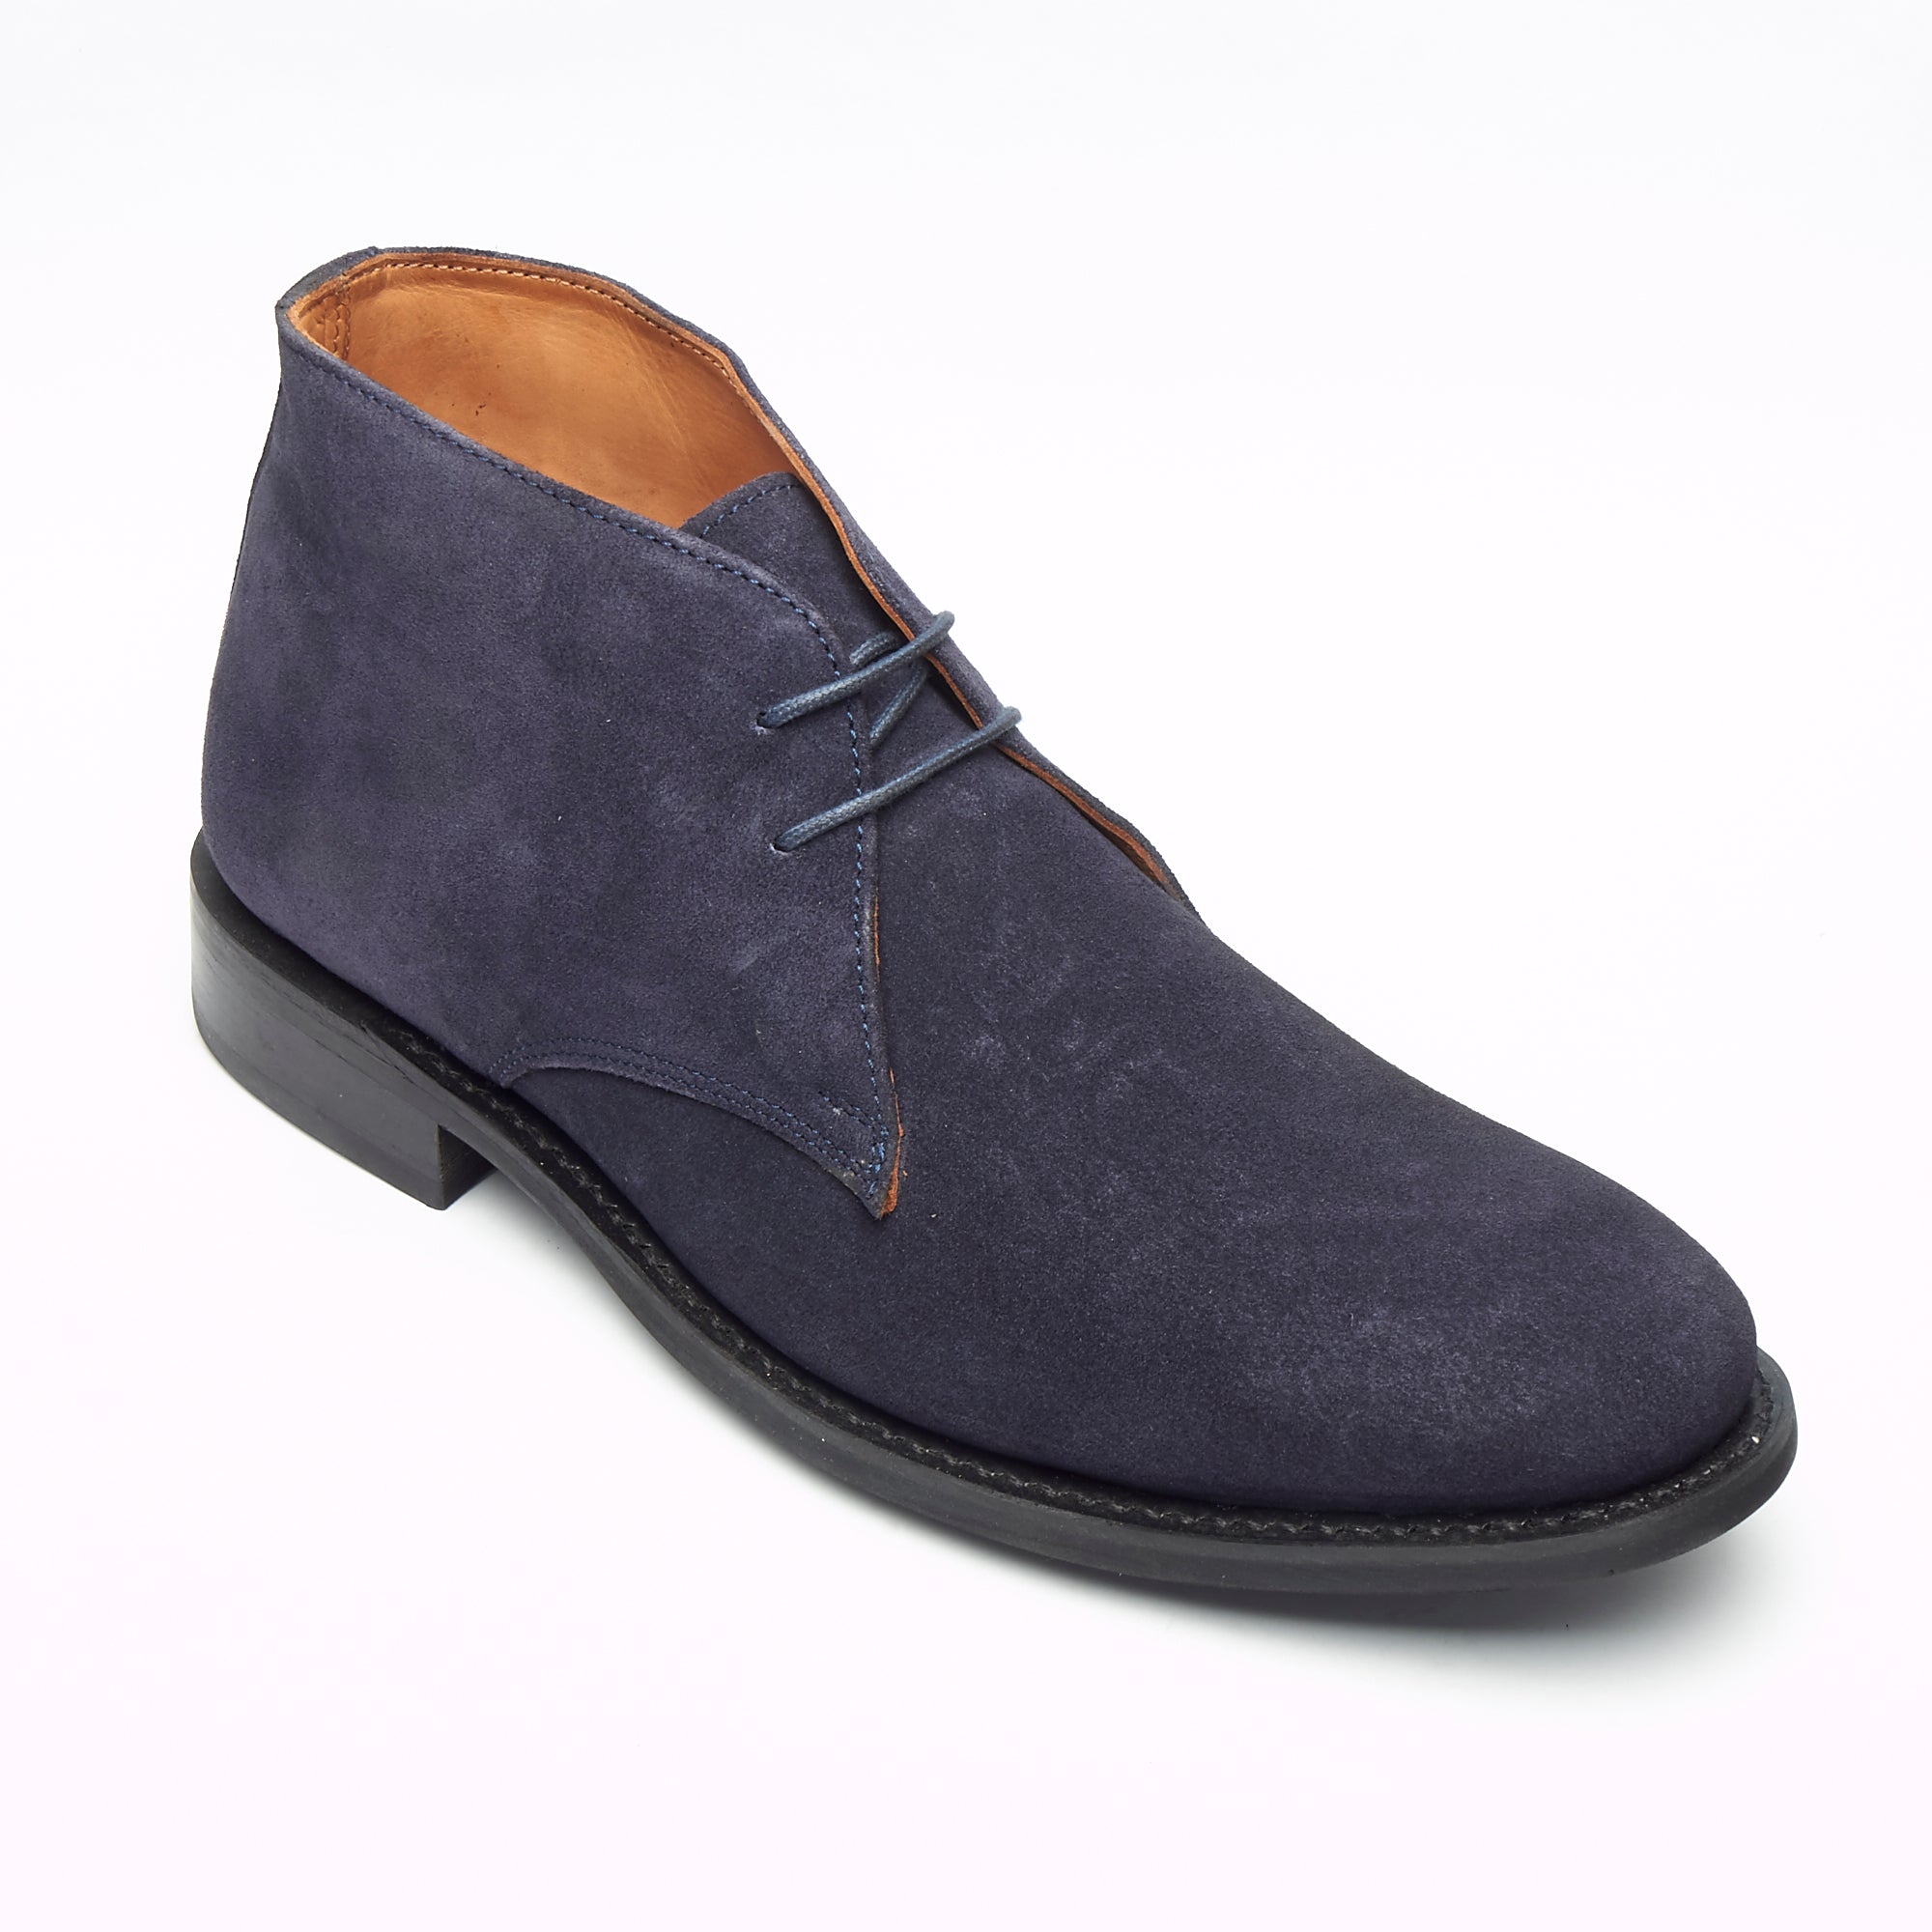 Mens Goodyear Welted Suede Lace Up Ankle Boots - 35515 Navy Blue